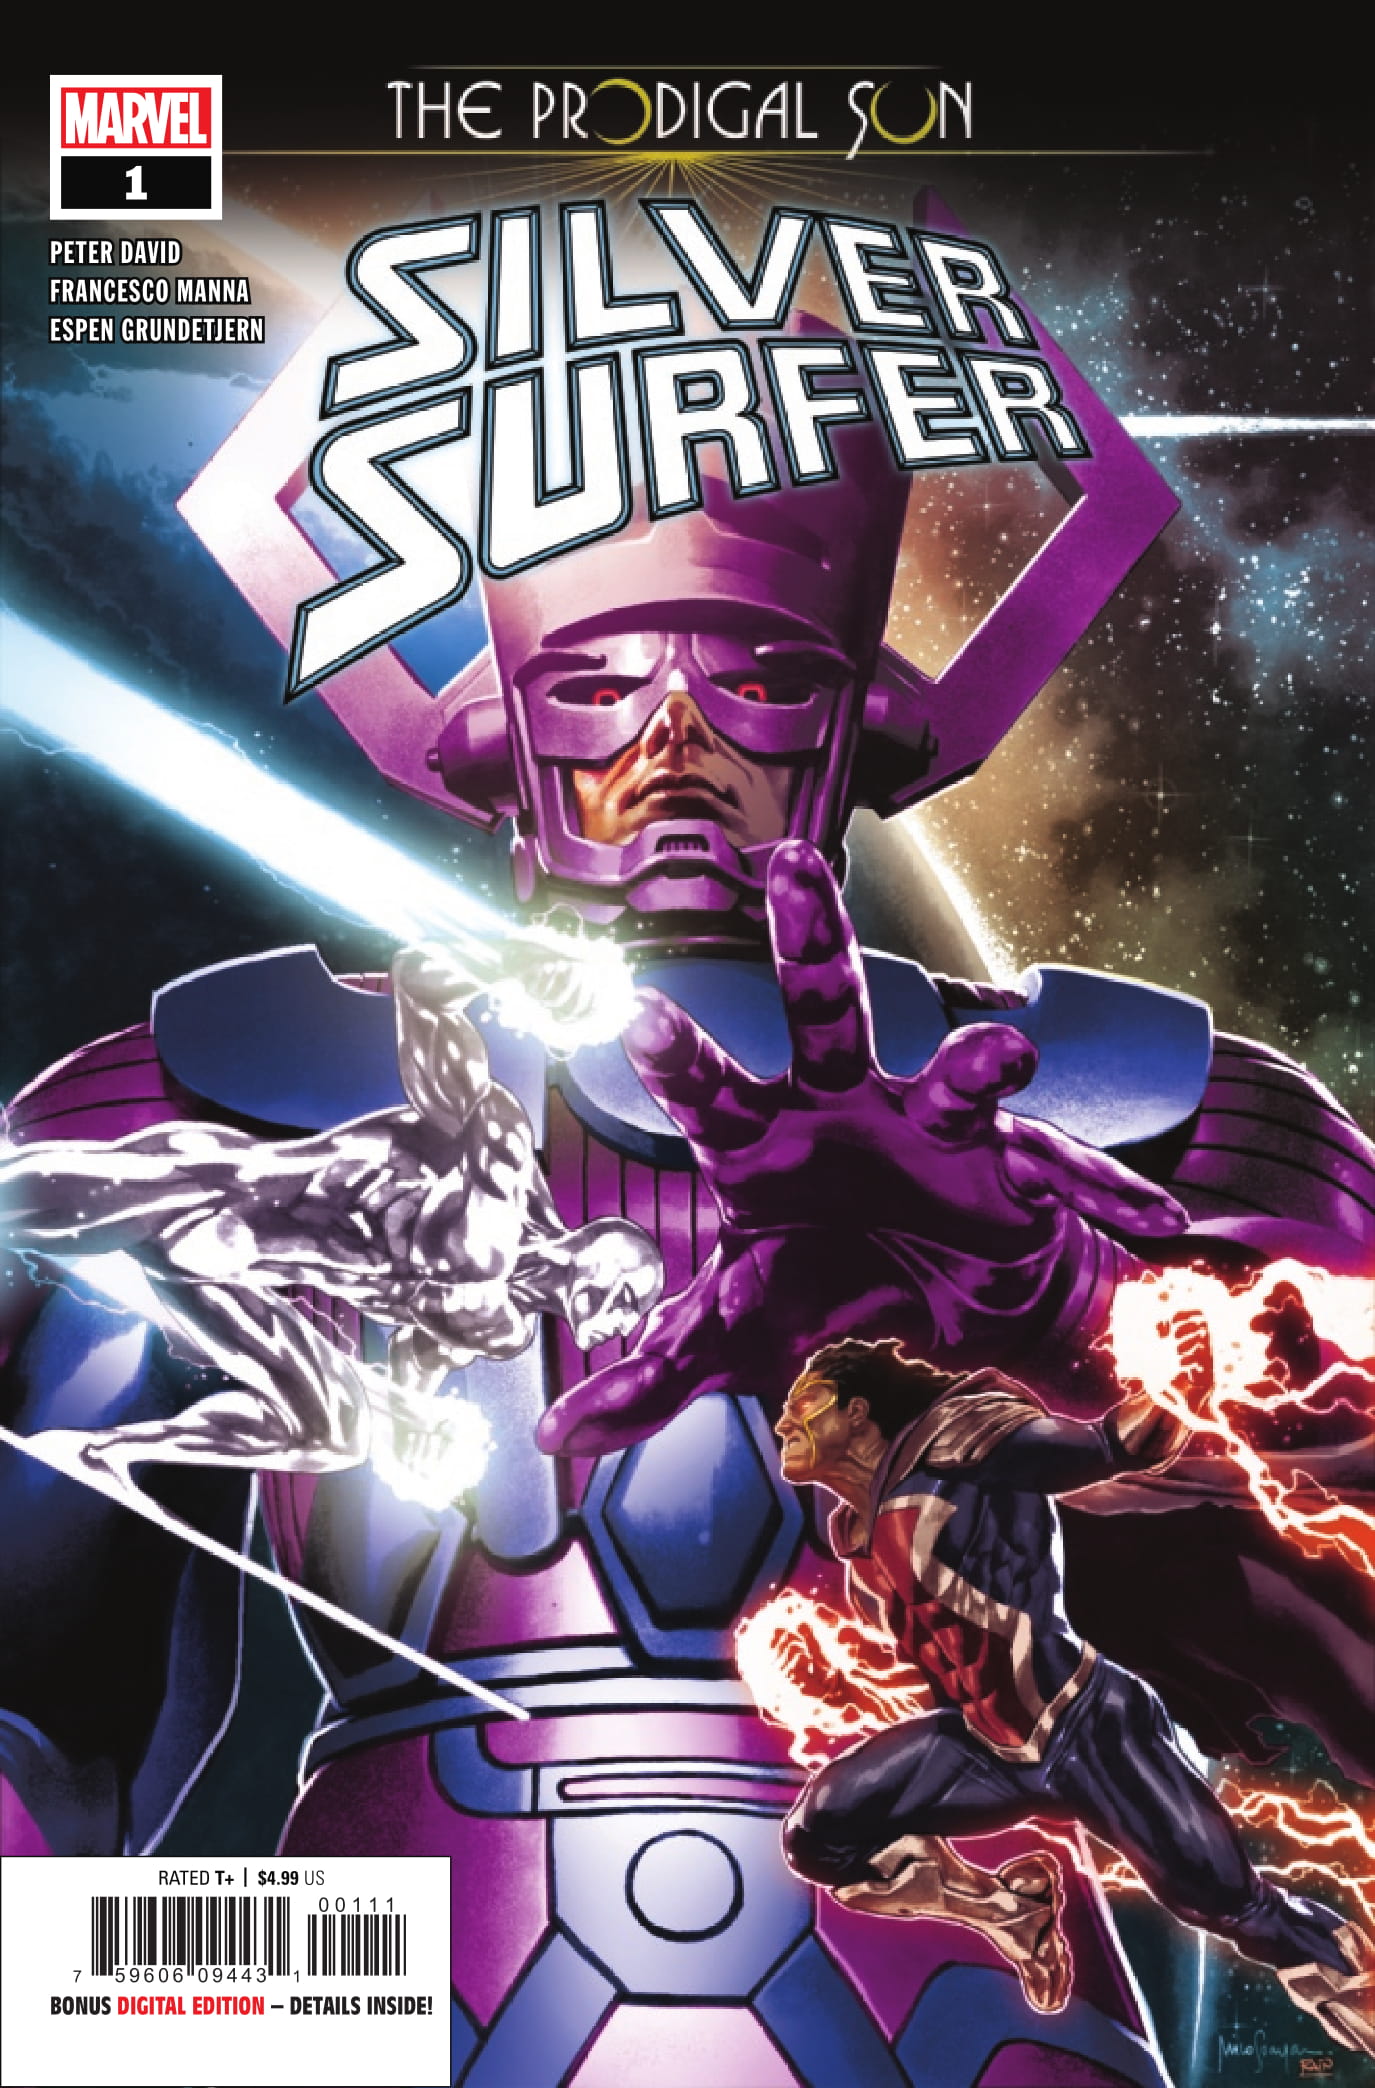 Silver Surfer: The Prodigal Sun #1 cover art